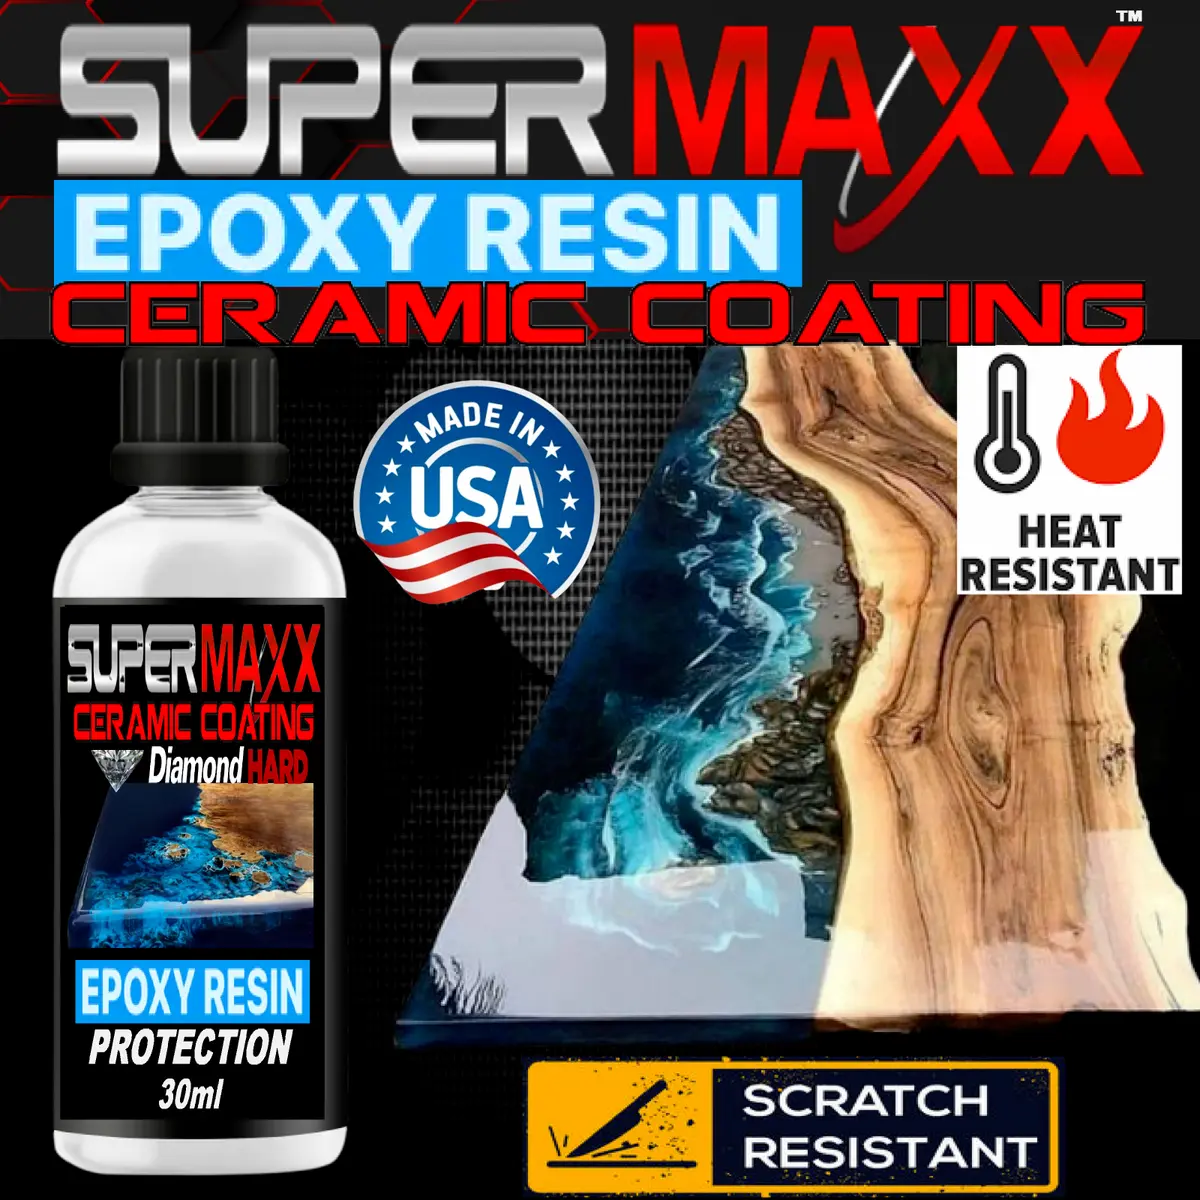 EPOXY RESIN PROTECTION HIGH STRENGTH CERAMIC COATING HEAT, SCRATCH RESISTANT